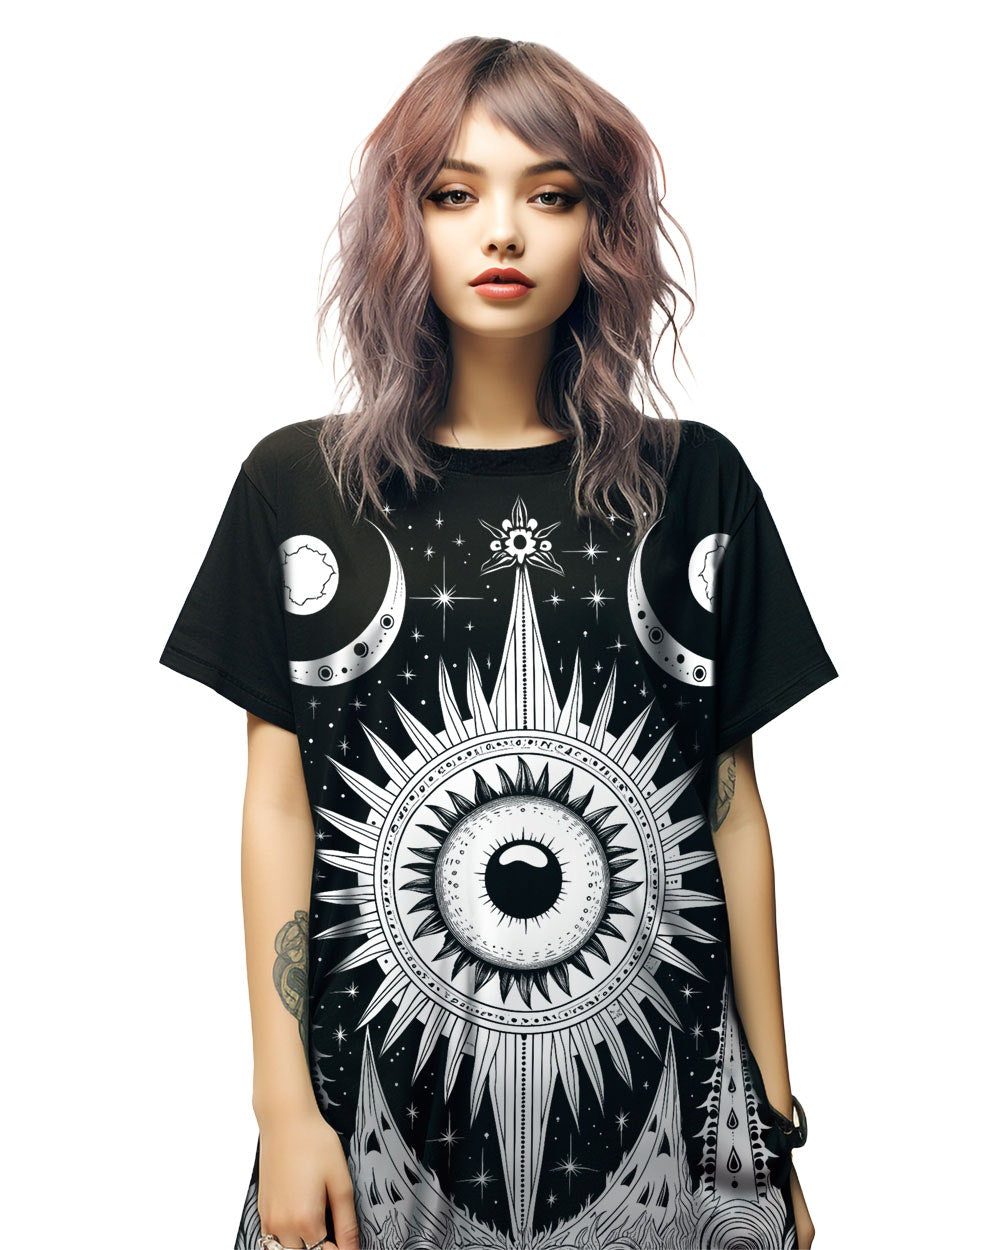 Rogue + Wolf Harajuku Goth Clothes Alt Clothing Gothic Tshirt for Women Emo  Halloween Dress Aesthetic